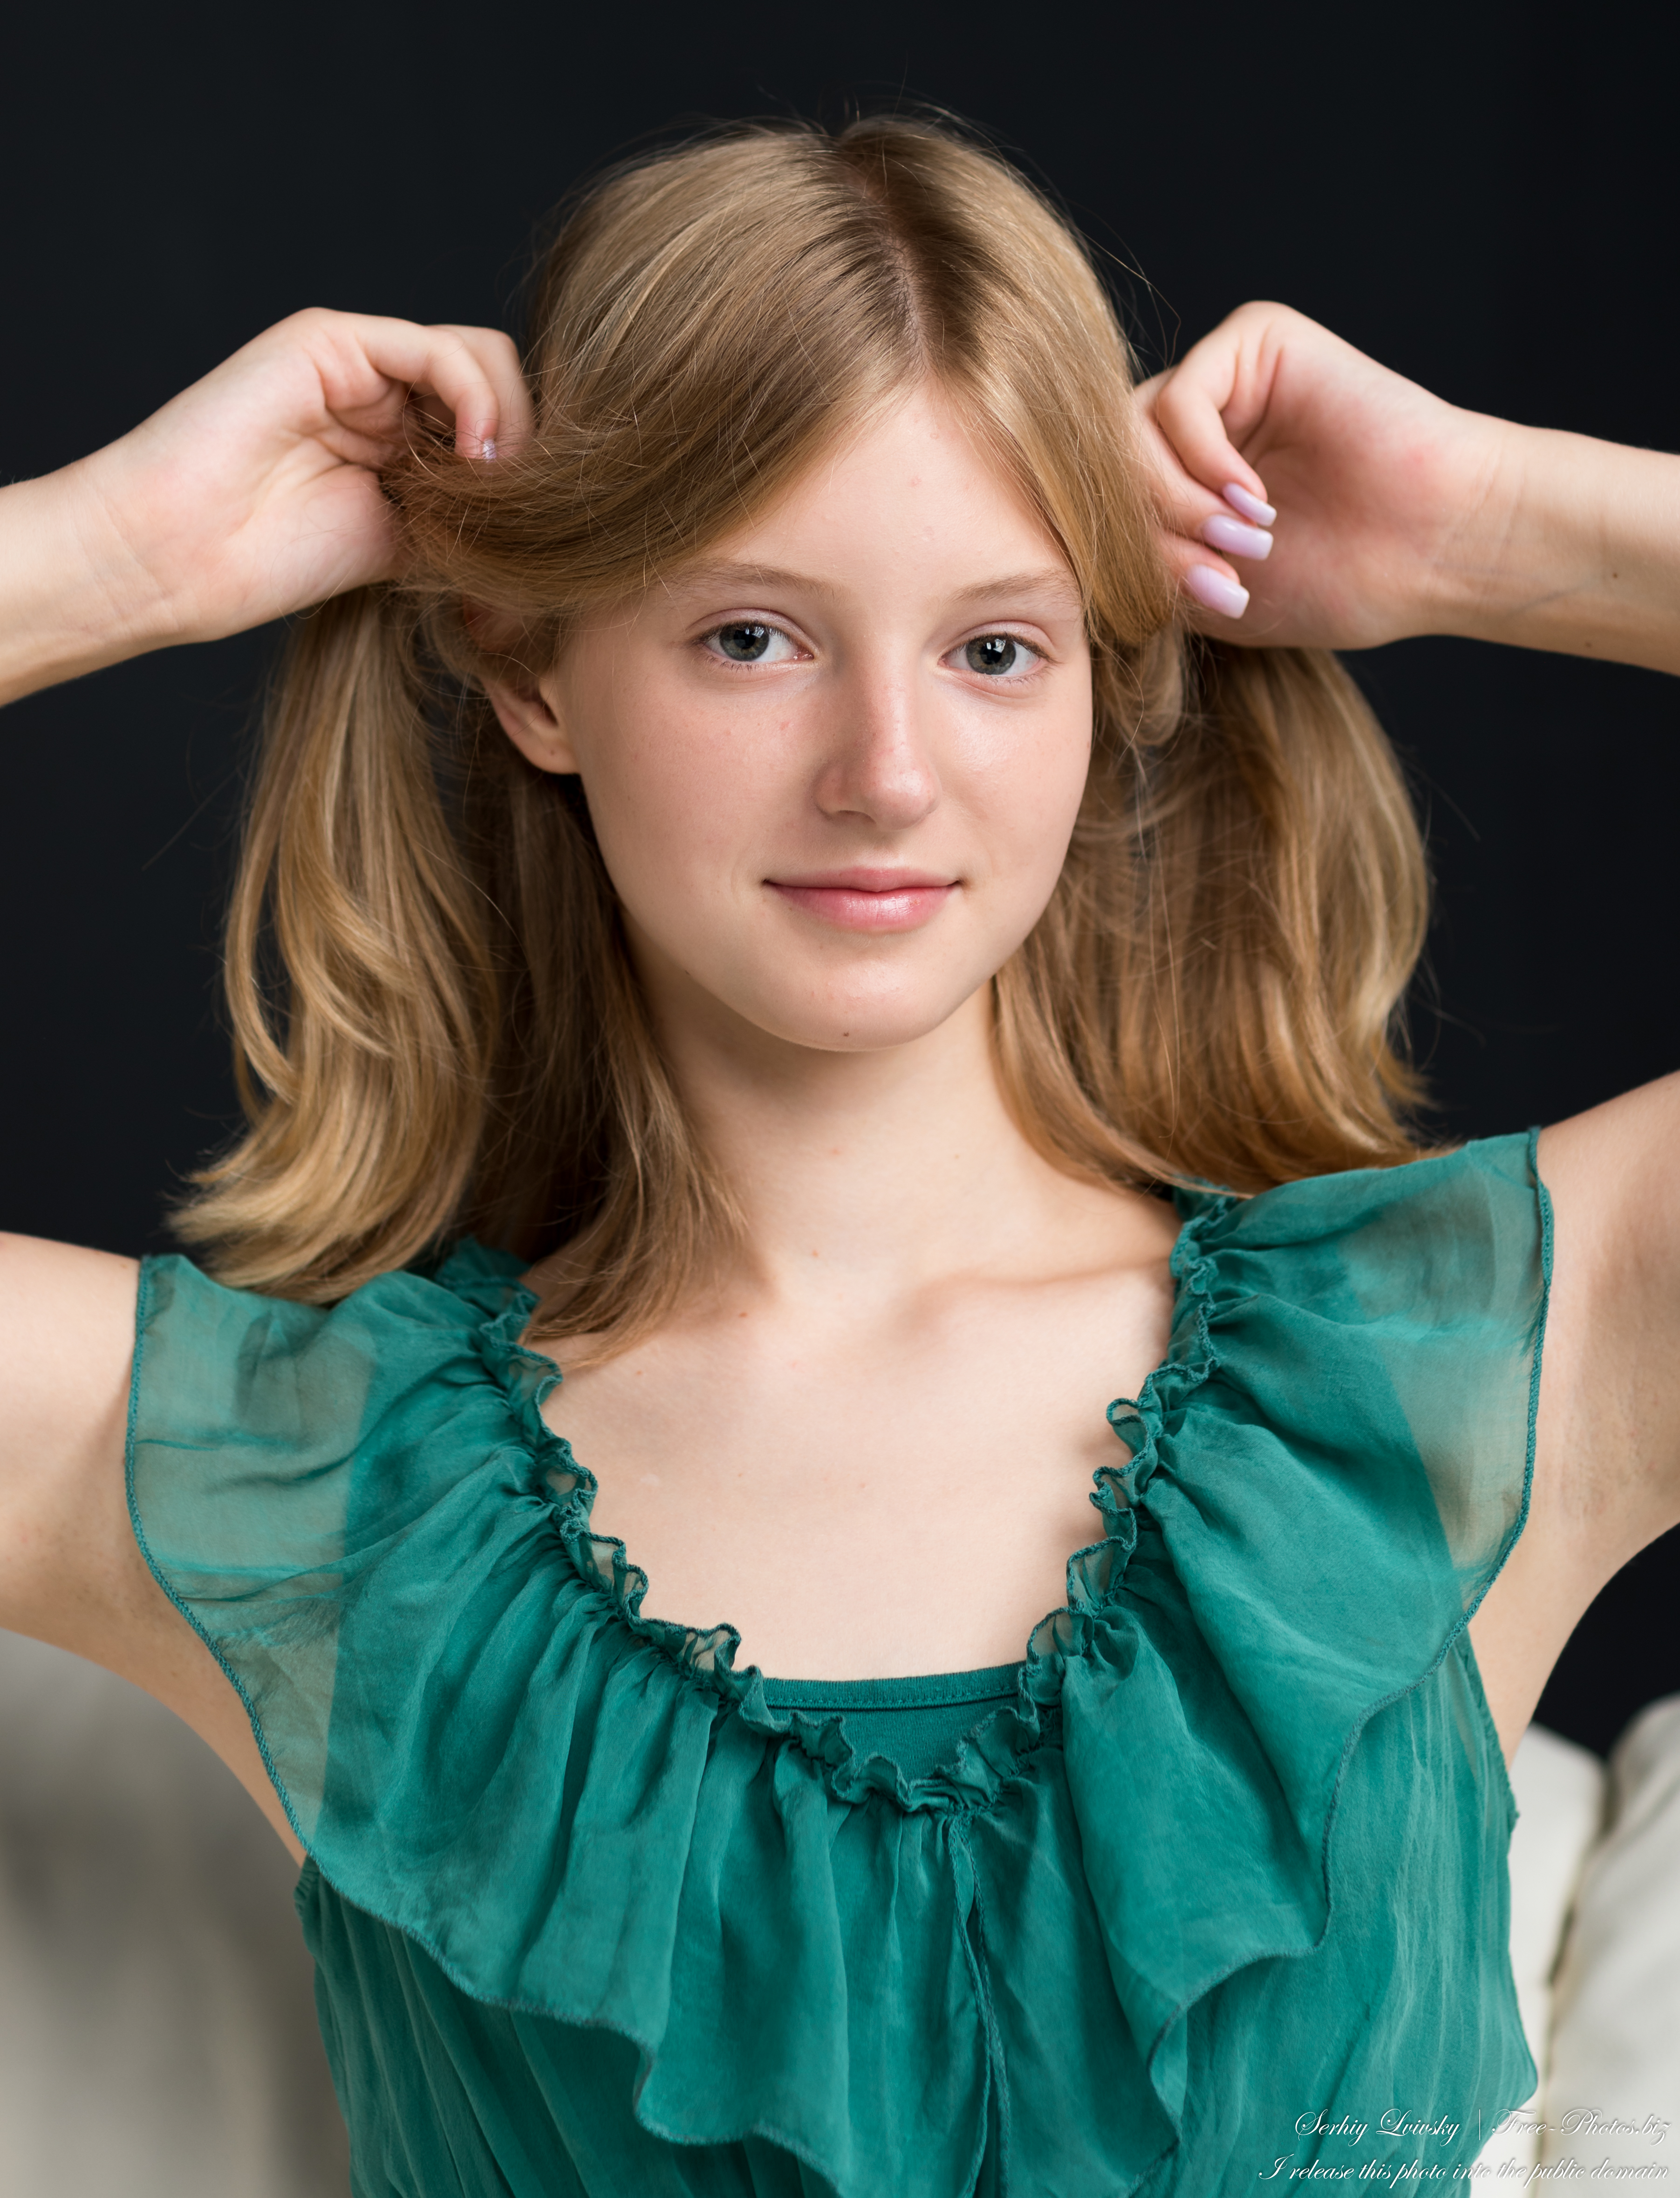 martha_a_13-year-old_natural_blonde_girl_aug_2023_by_serhiy_lvivsky_16